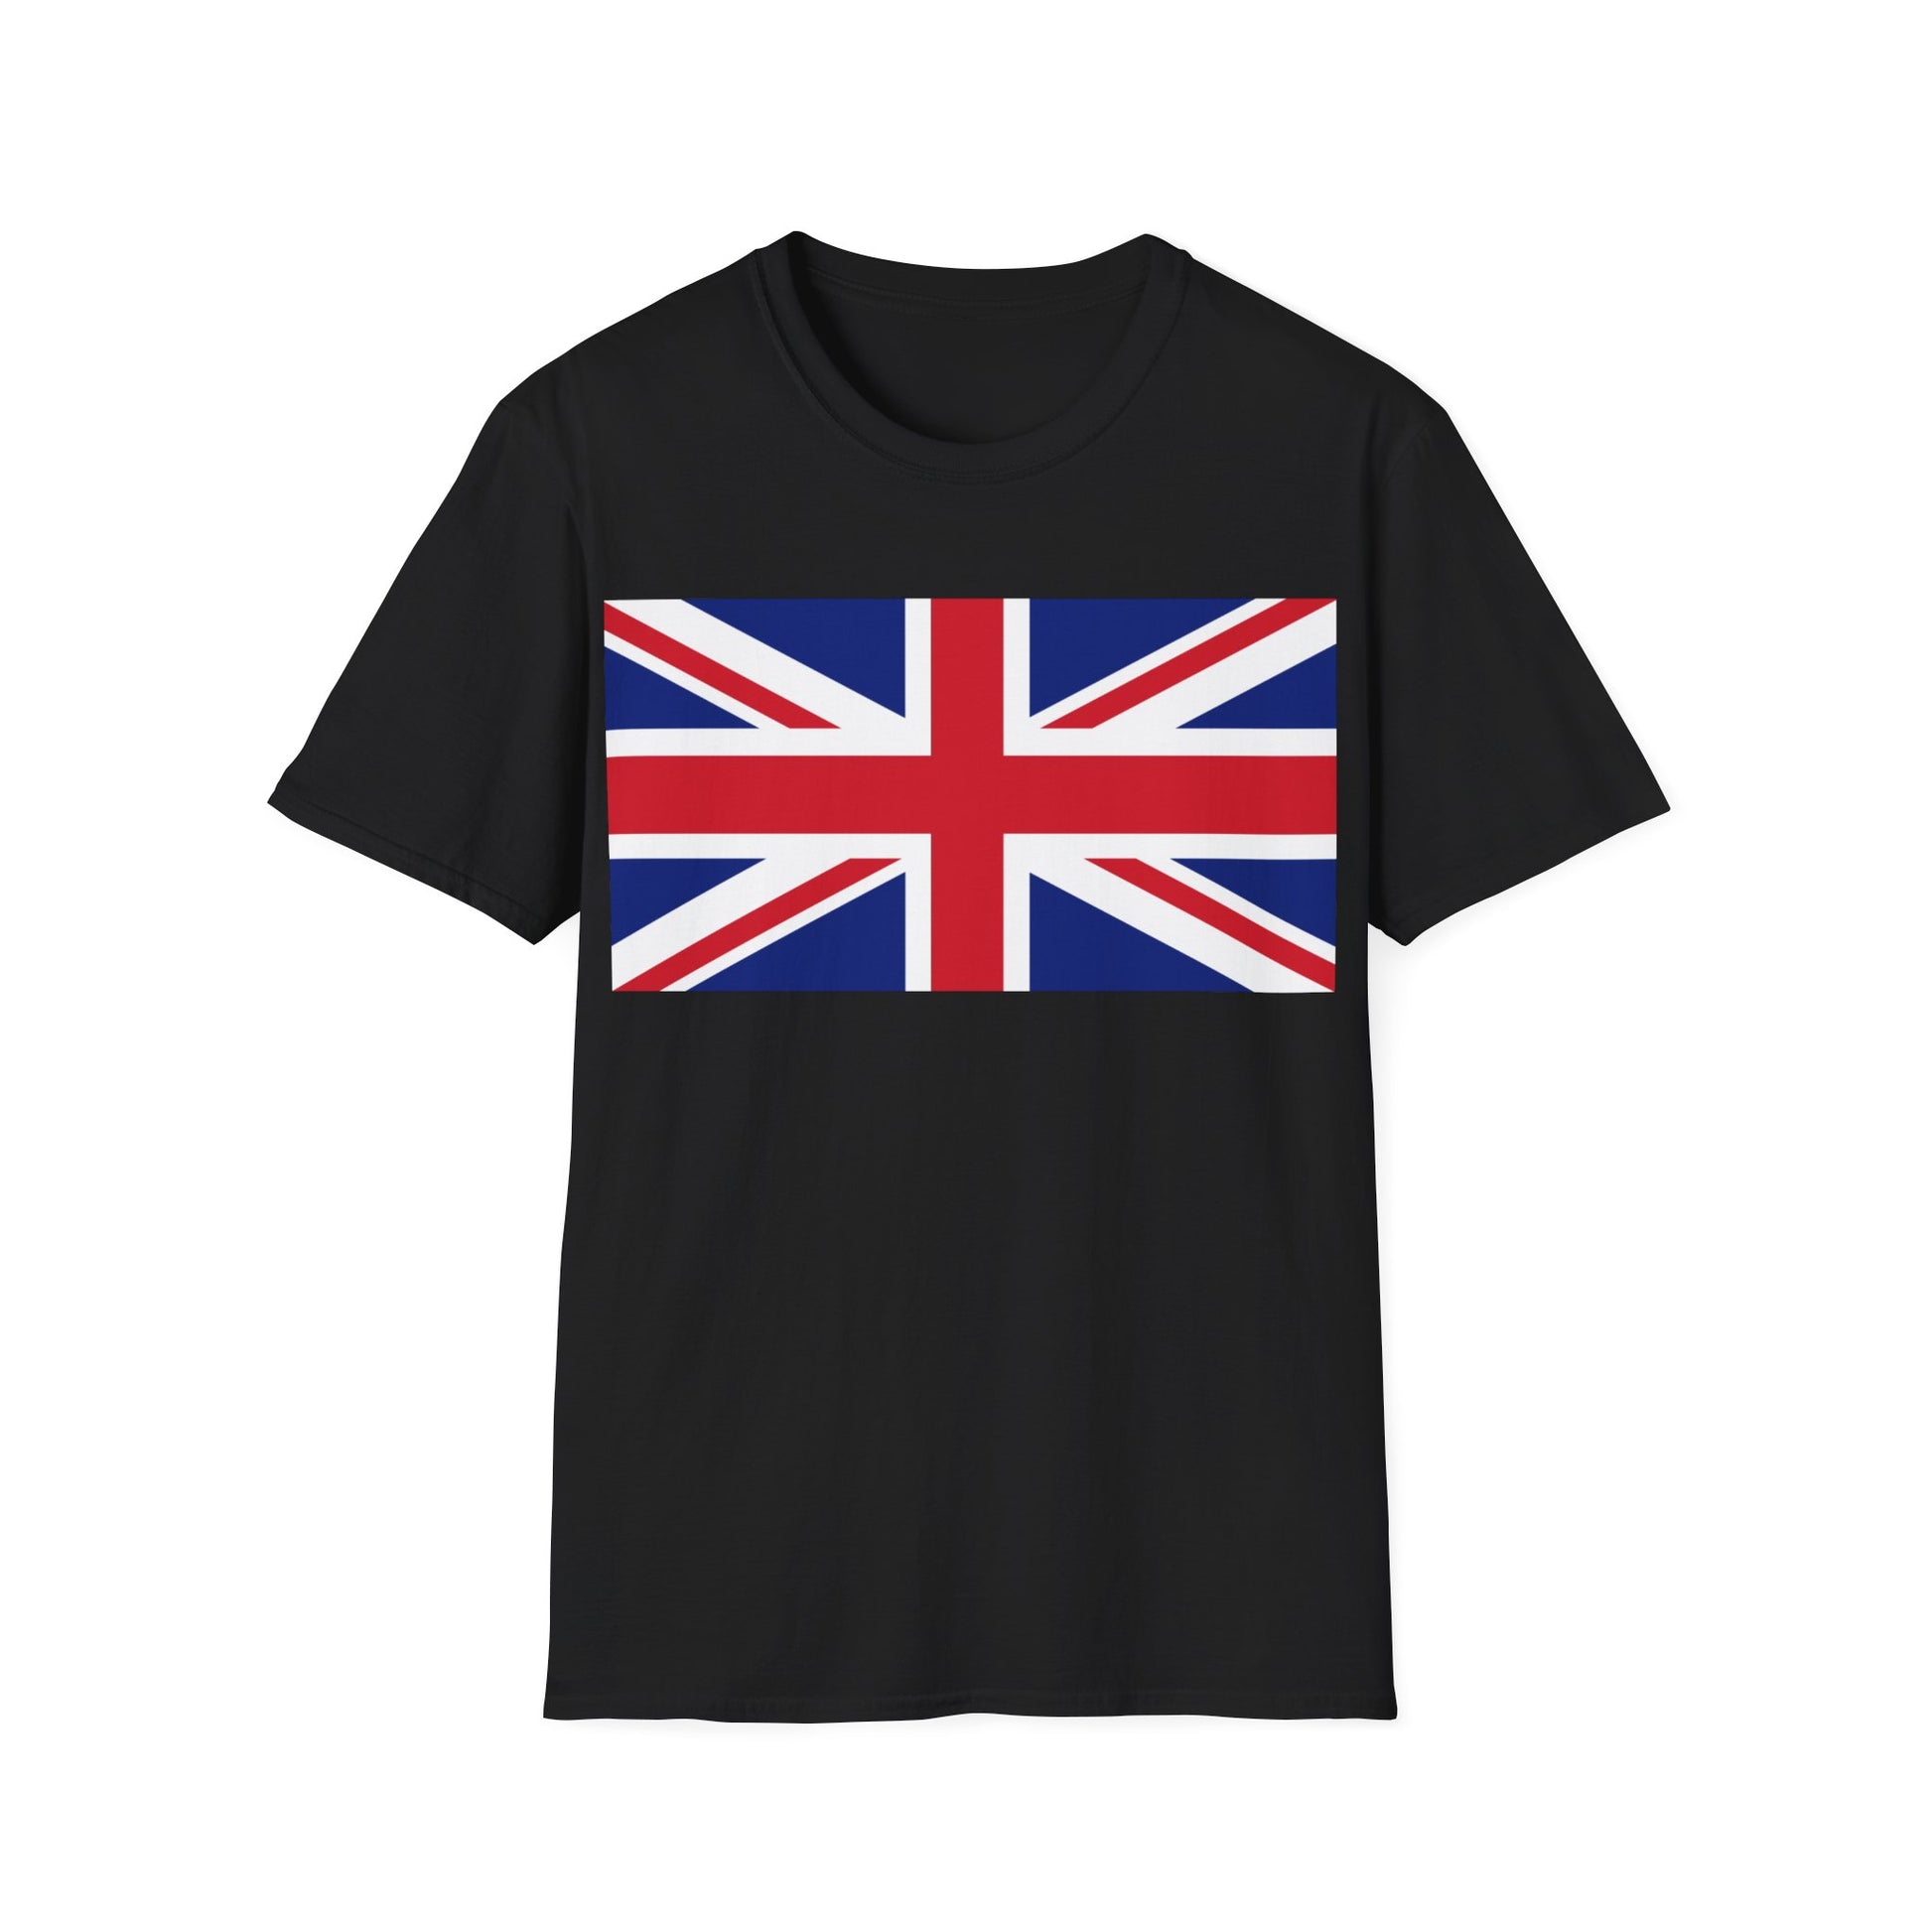 A black t-shirt with a design of the British Union Jack flag